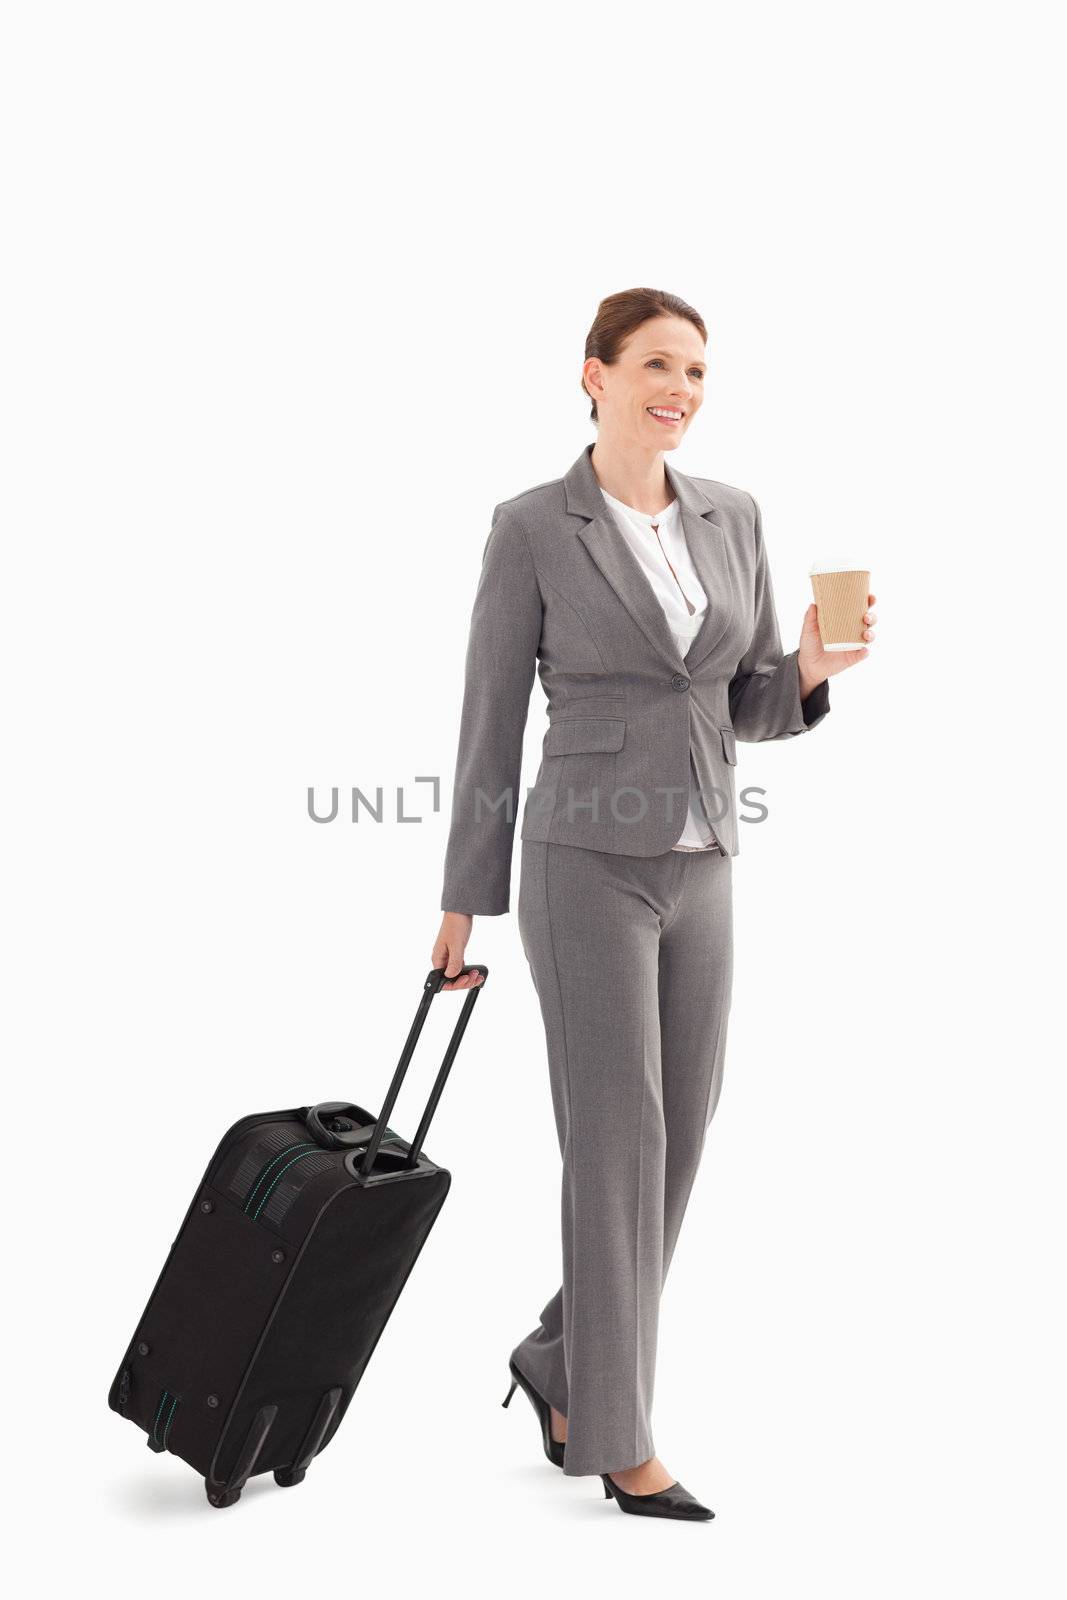 A businesswoman with coffee and a suitcase